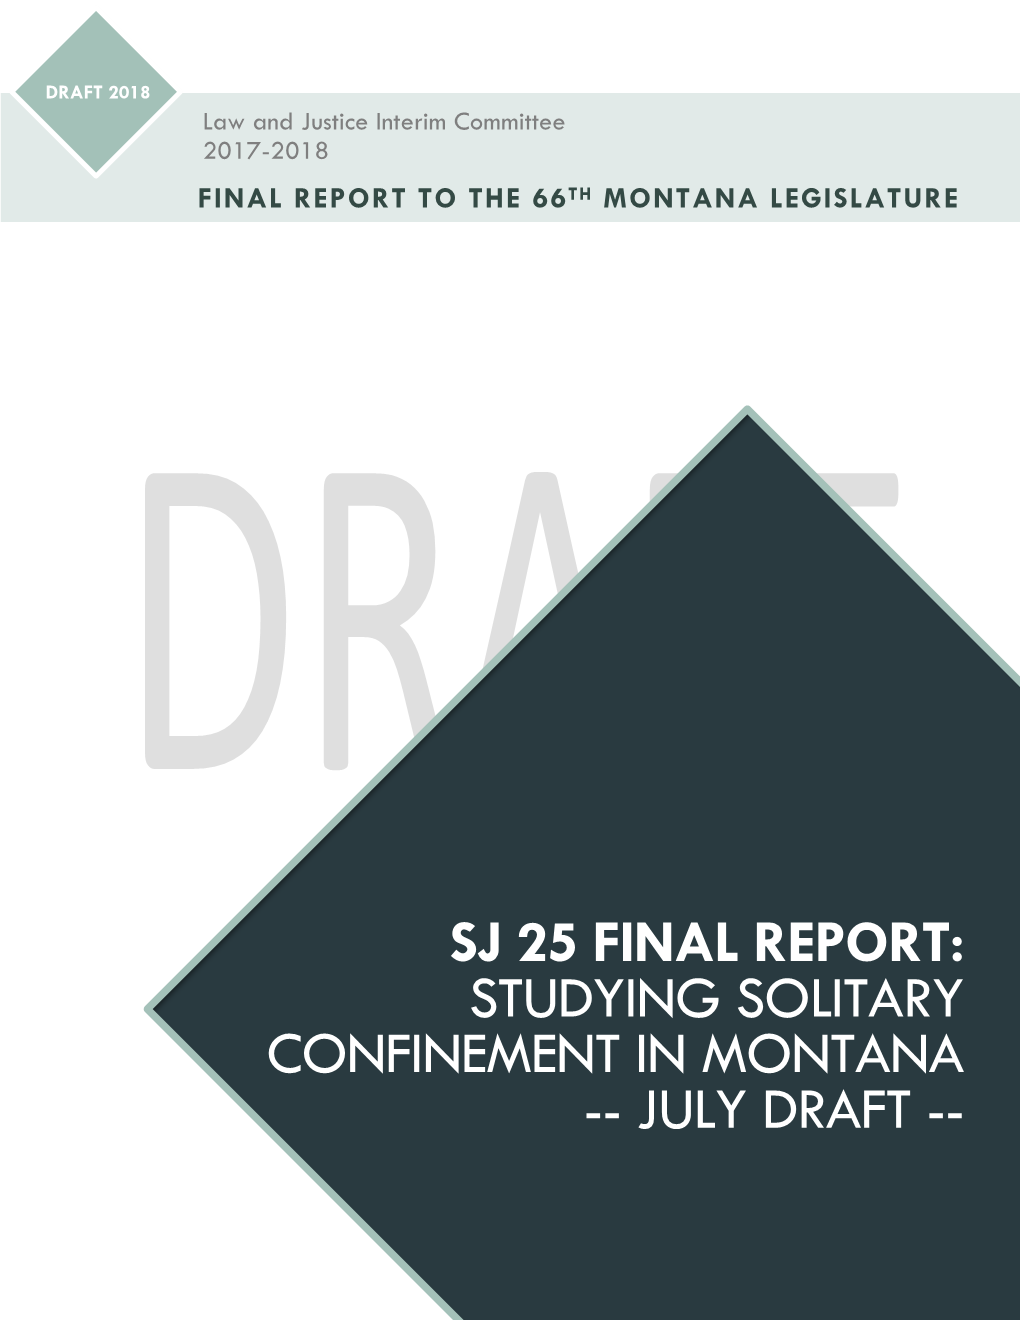 Sj 25 Final Report: Studying Solitary Confinement in Montana -- July Draft -- 2017-2018 Law and Justice Interim Committee Members